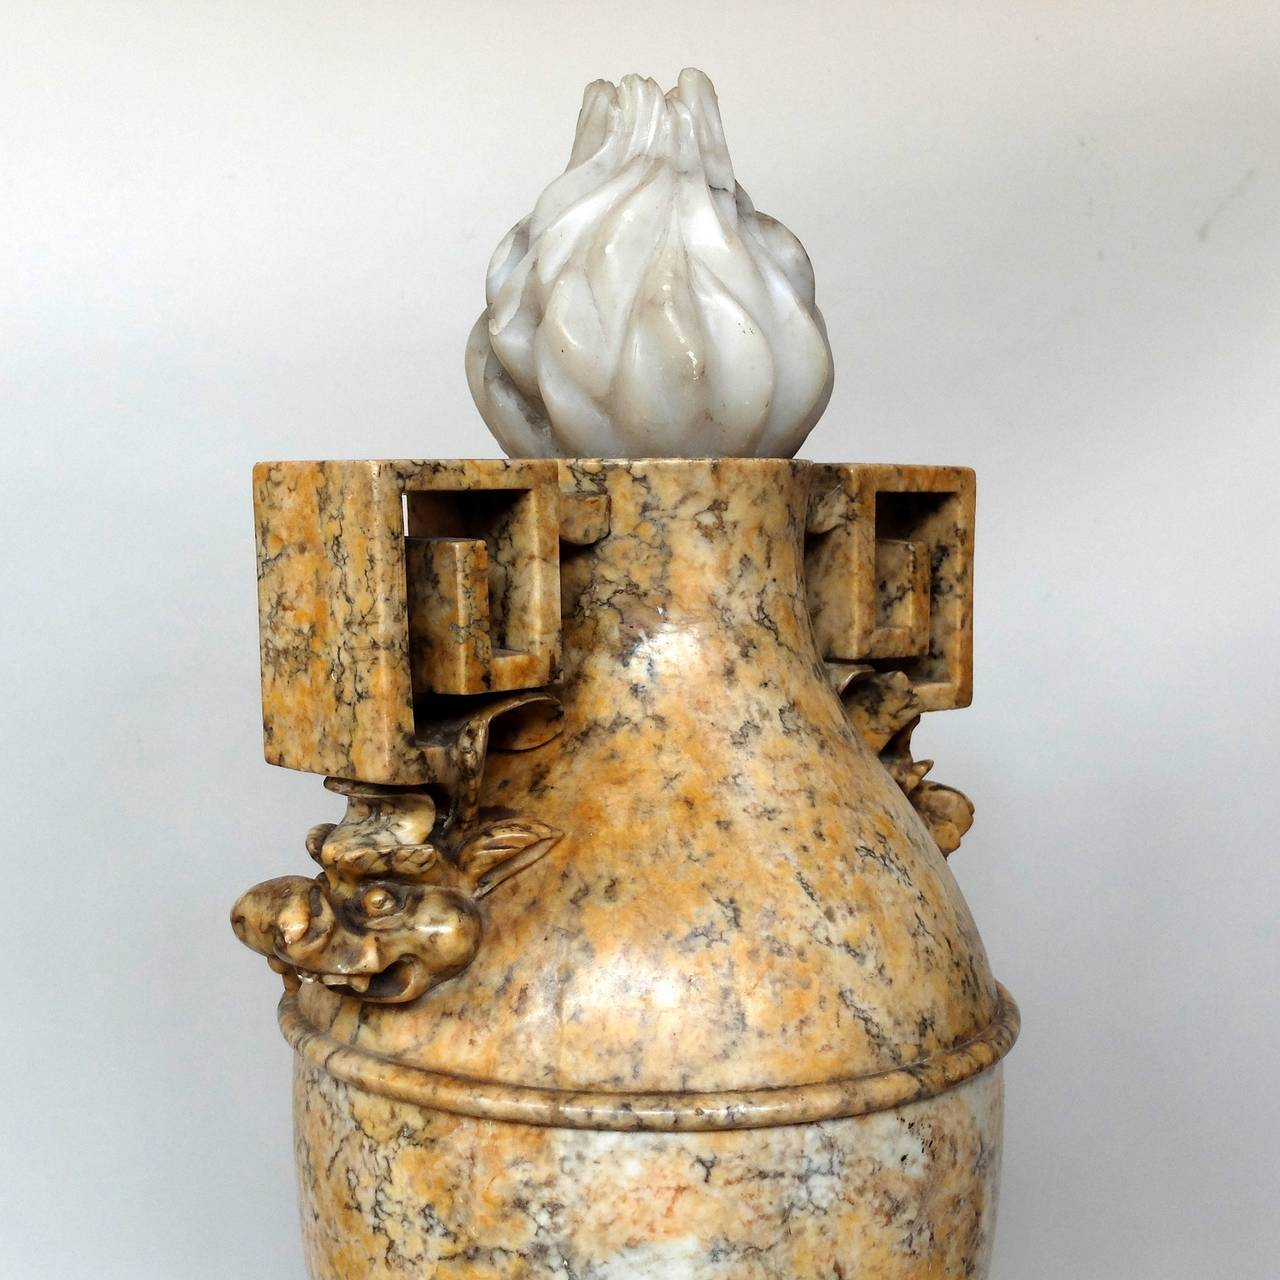 In the form of a flame-topped urn, with stylized handles.